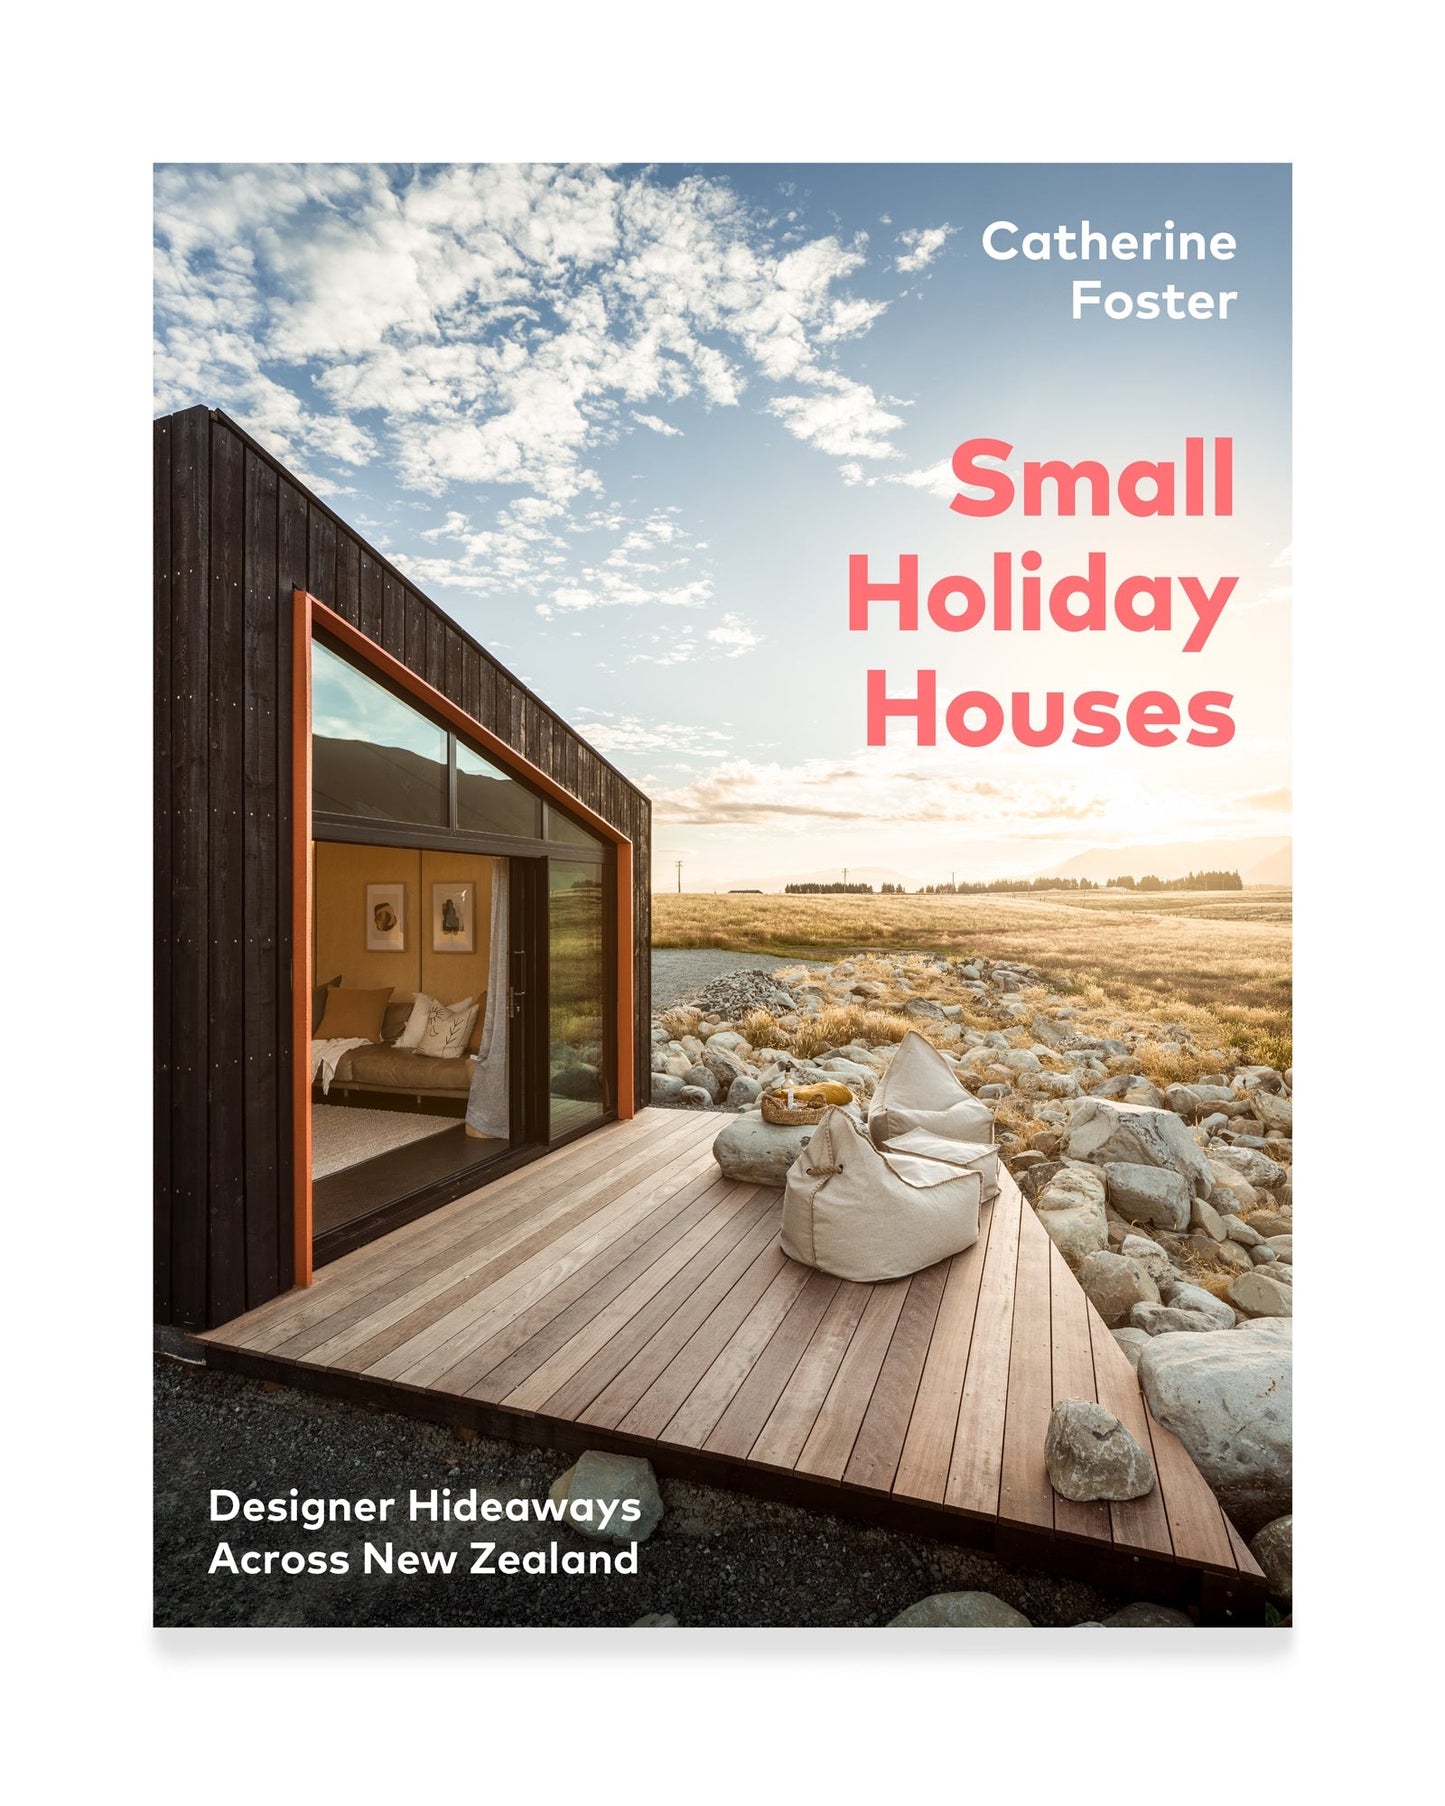 SMALL HOLIDAY HOUSES